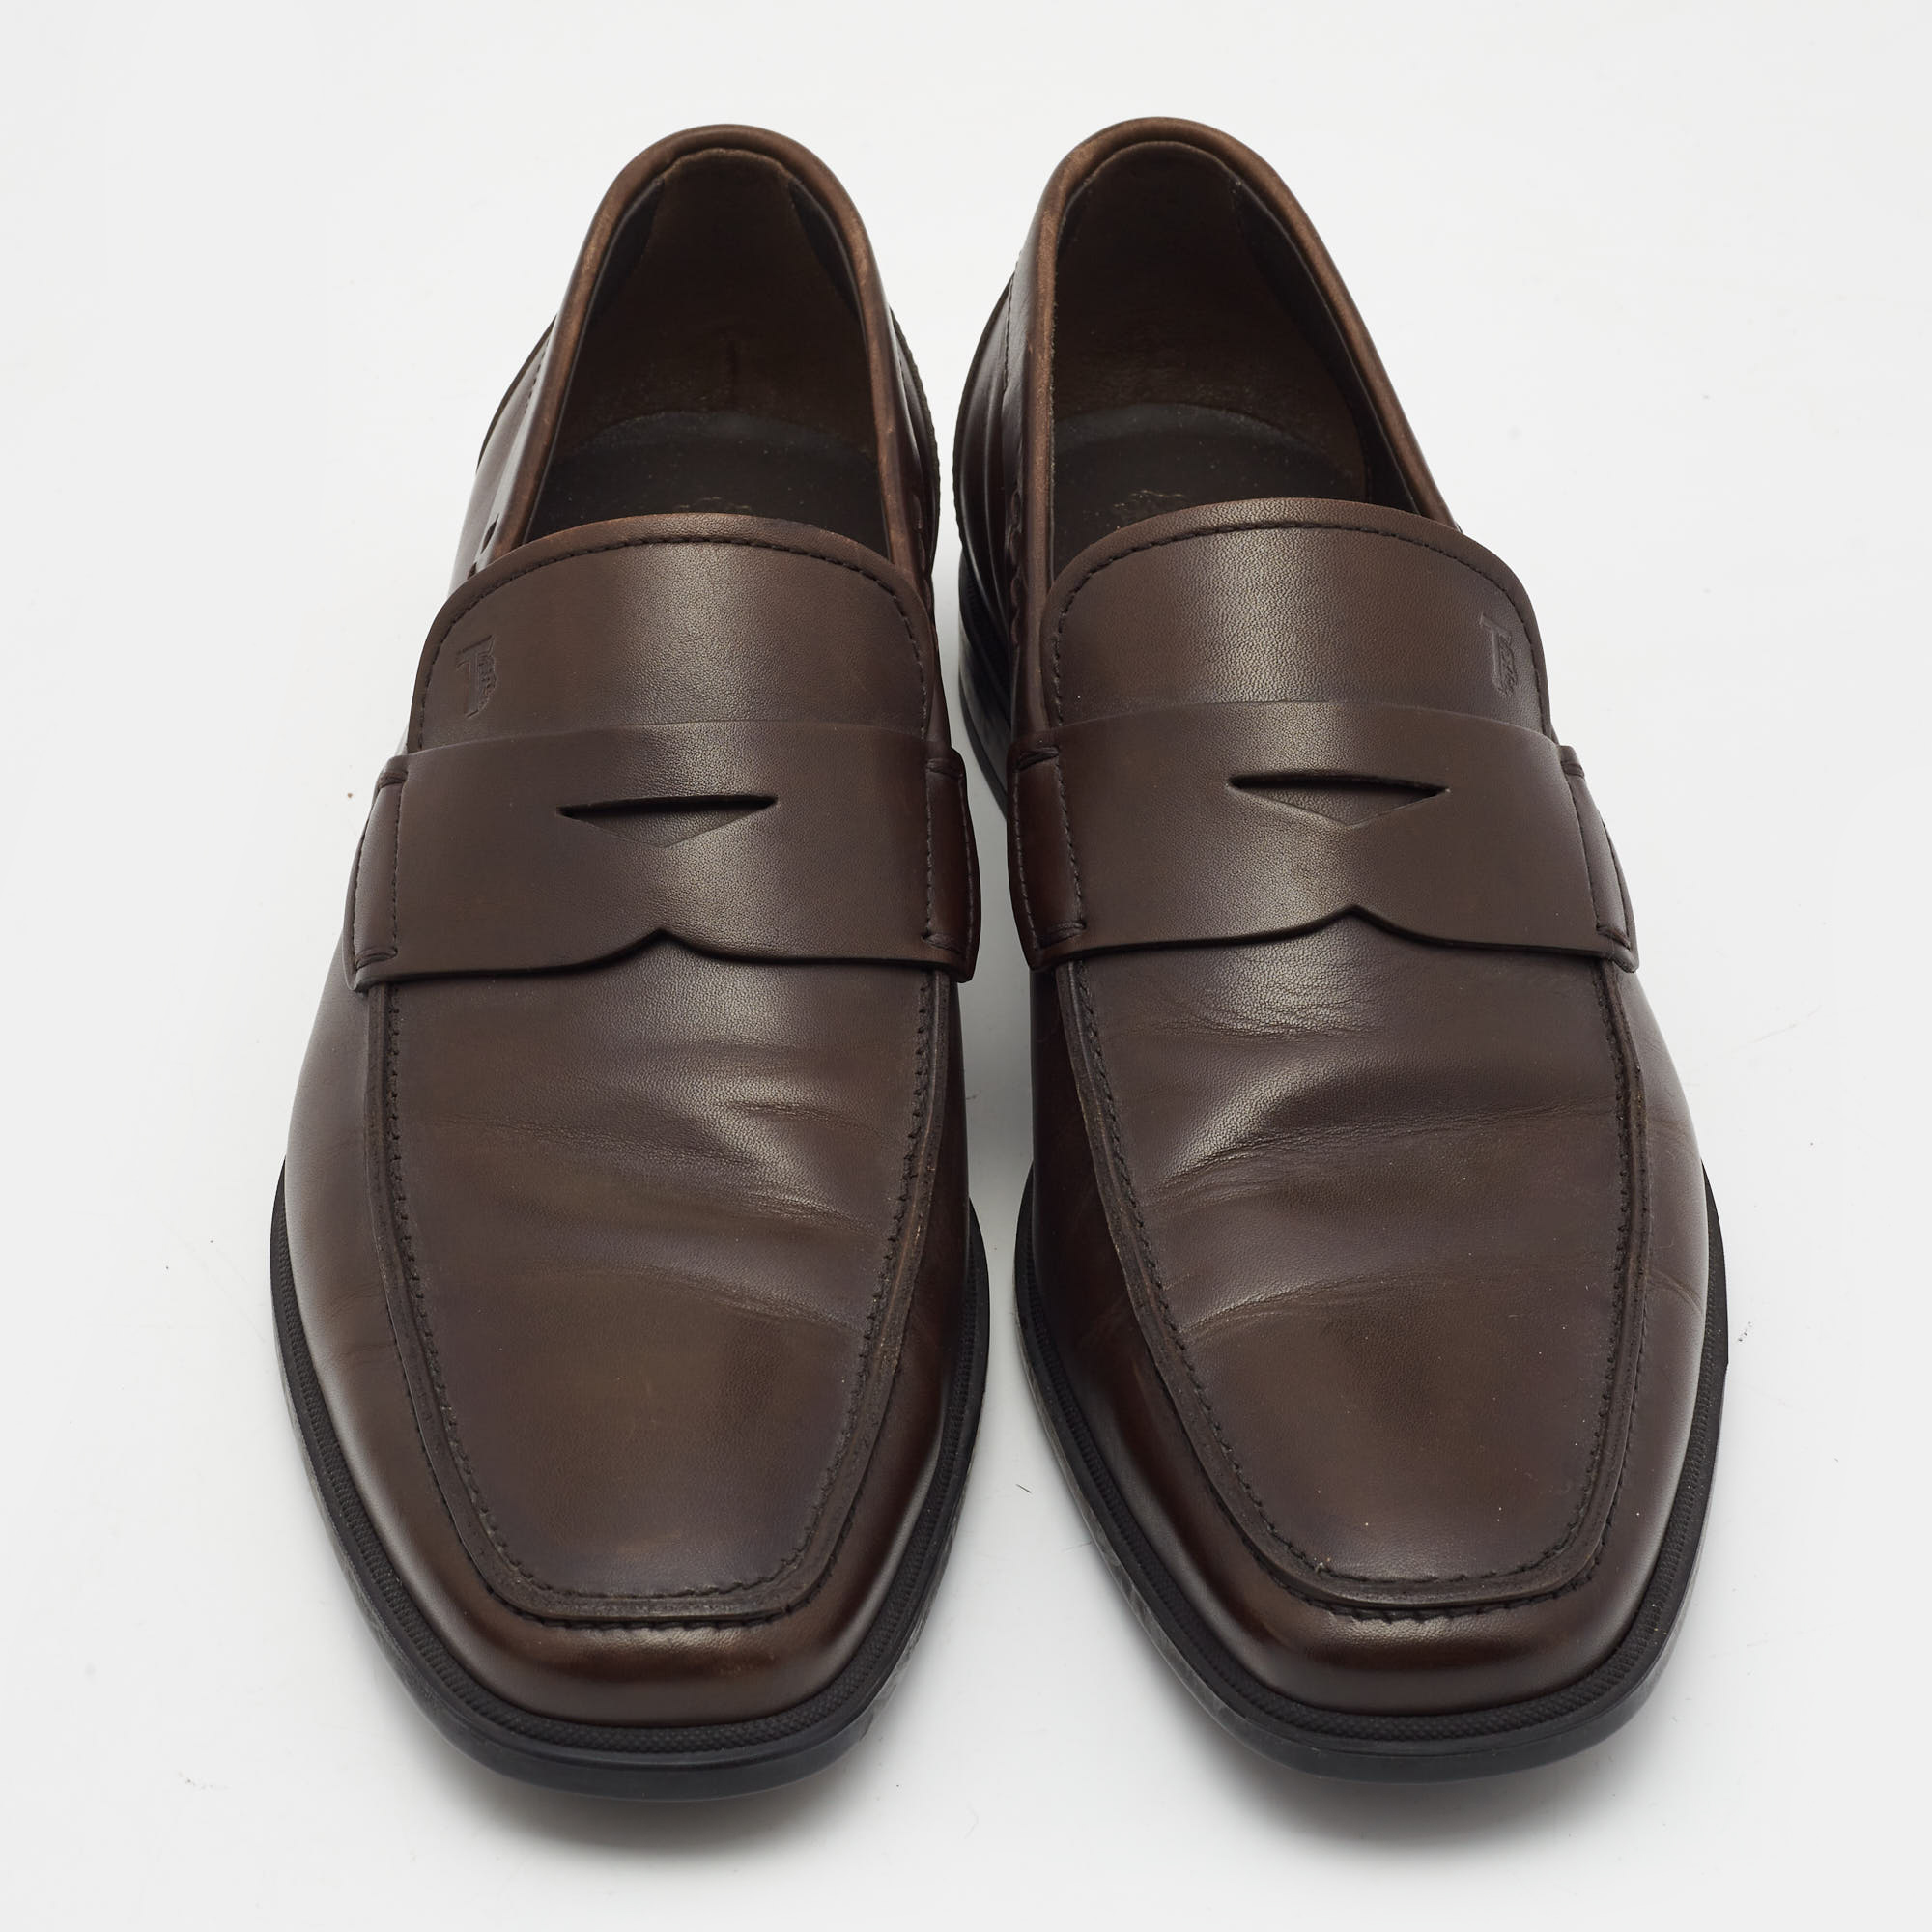 Tods Brown Leather Slip On Loafers Size 41